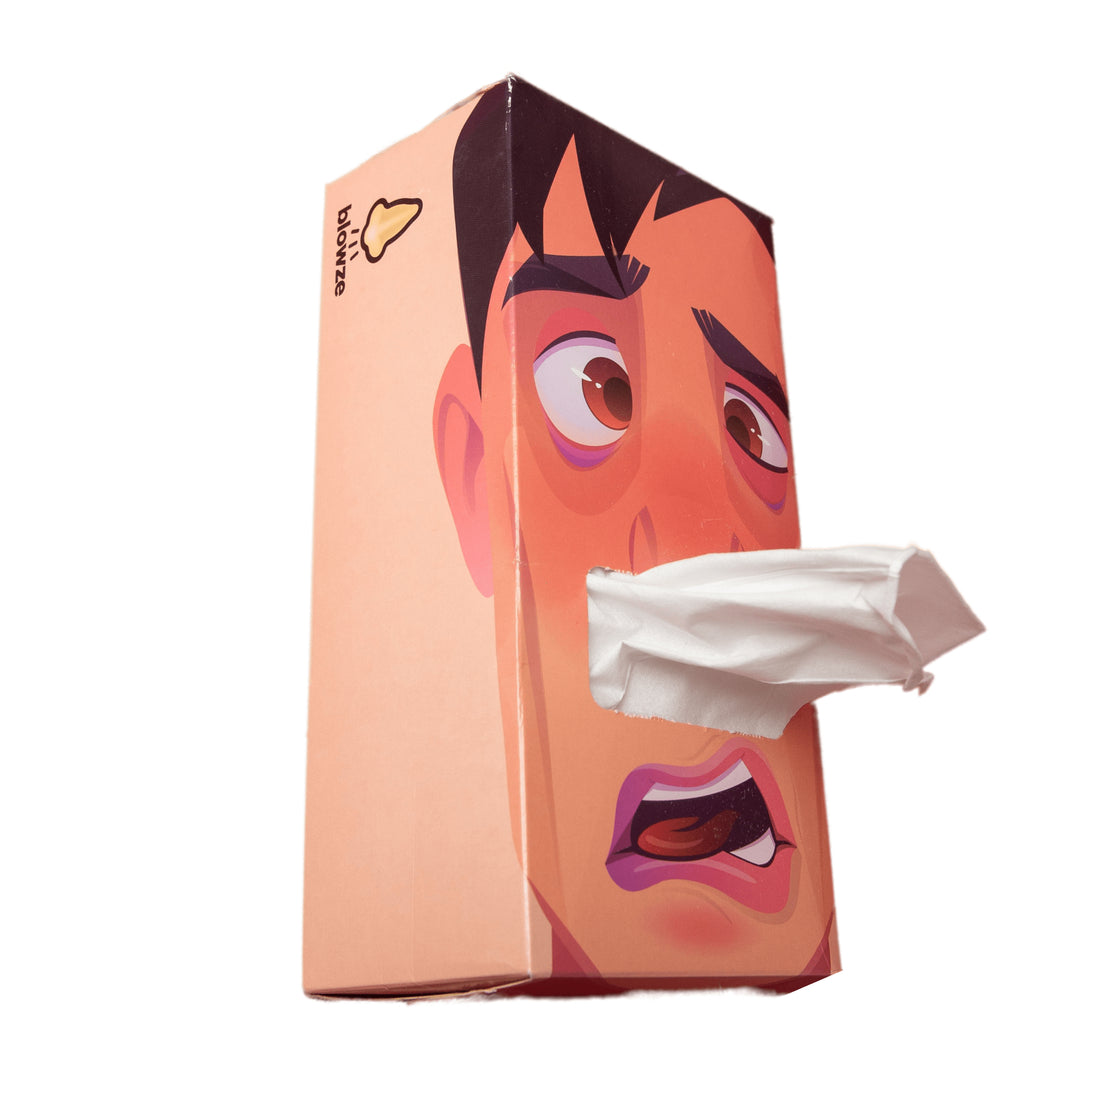 Under the Weather-man Tissues AntiViral Tissues Hypoallergenic Tissues Soft Tissues Lotion Infused Tissues Large Tissue Boxes Decorative Tissue Boxes Eco Friendly Tissues Sneeze Silencer Healthy Tissues Soothing Tissues Sustainable Tissues Beautiful Tissue Boxes Clean Tissues Hygienic Tissues Gentle Tissues Moisturizing Tissues Convenient Tissues Home Essential Family Size Tissues